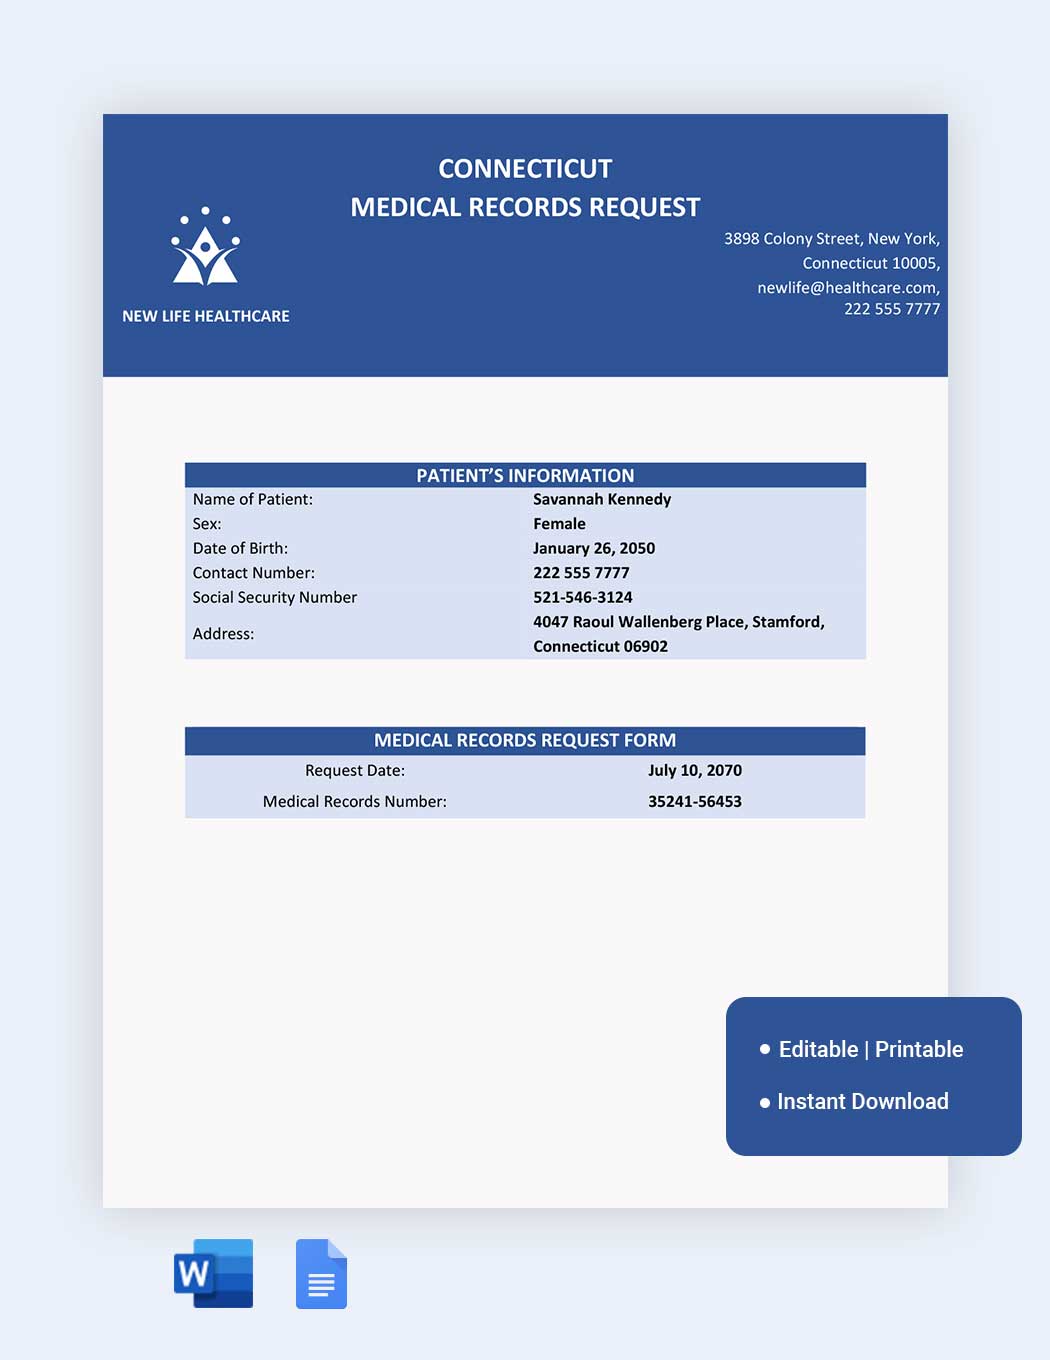 Connecticut Medical Records Request Template in Word, Google Docs